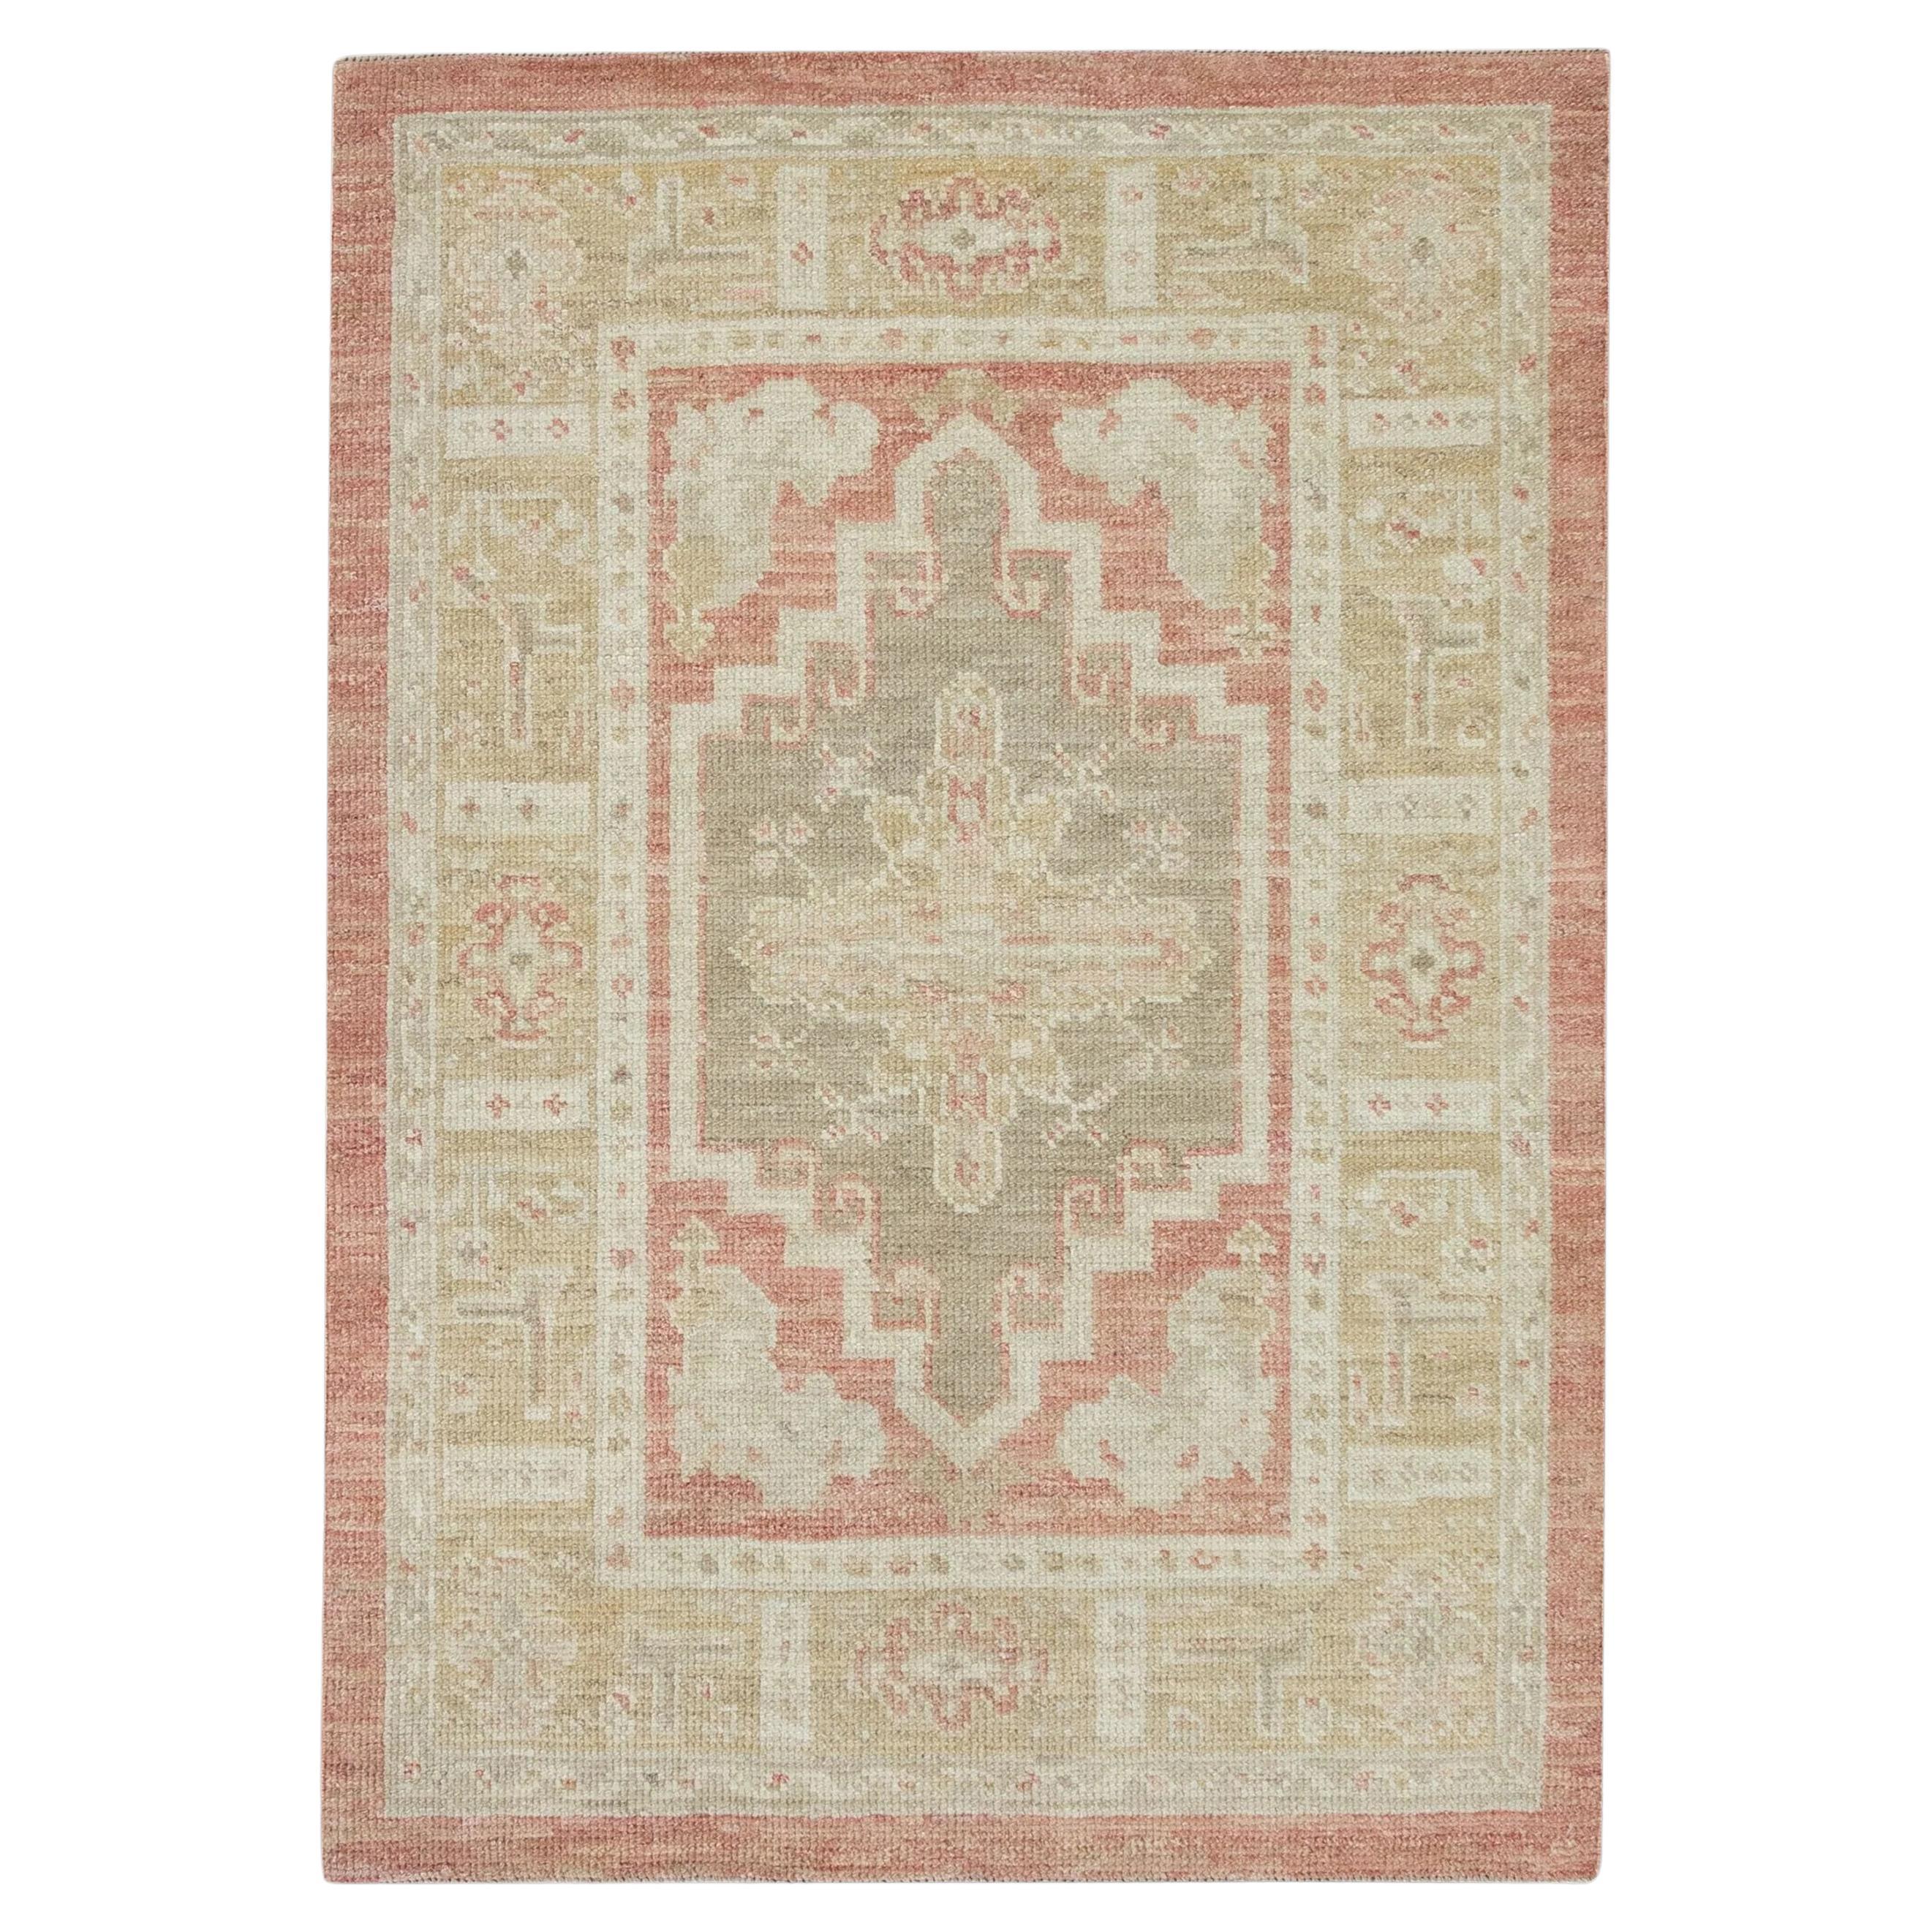 Red Handwoven Wool Turkish Oushak Rug with Medallion/Crest Design 2'11" x 4'3" For Sale